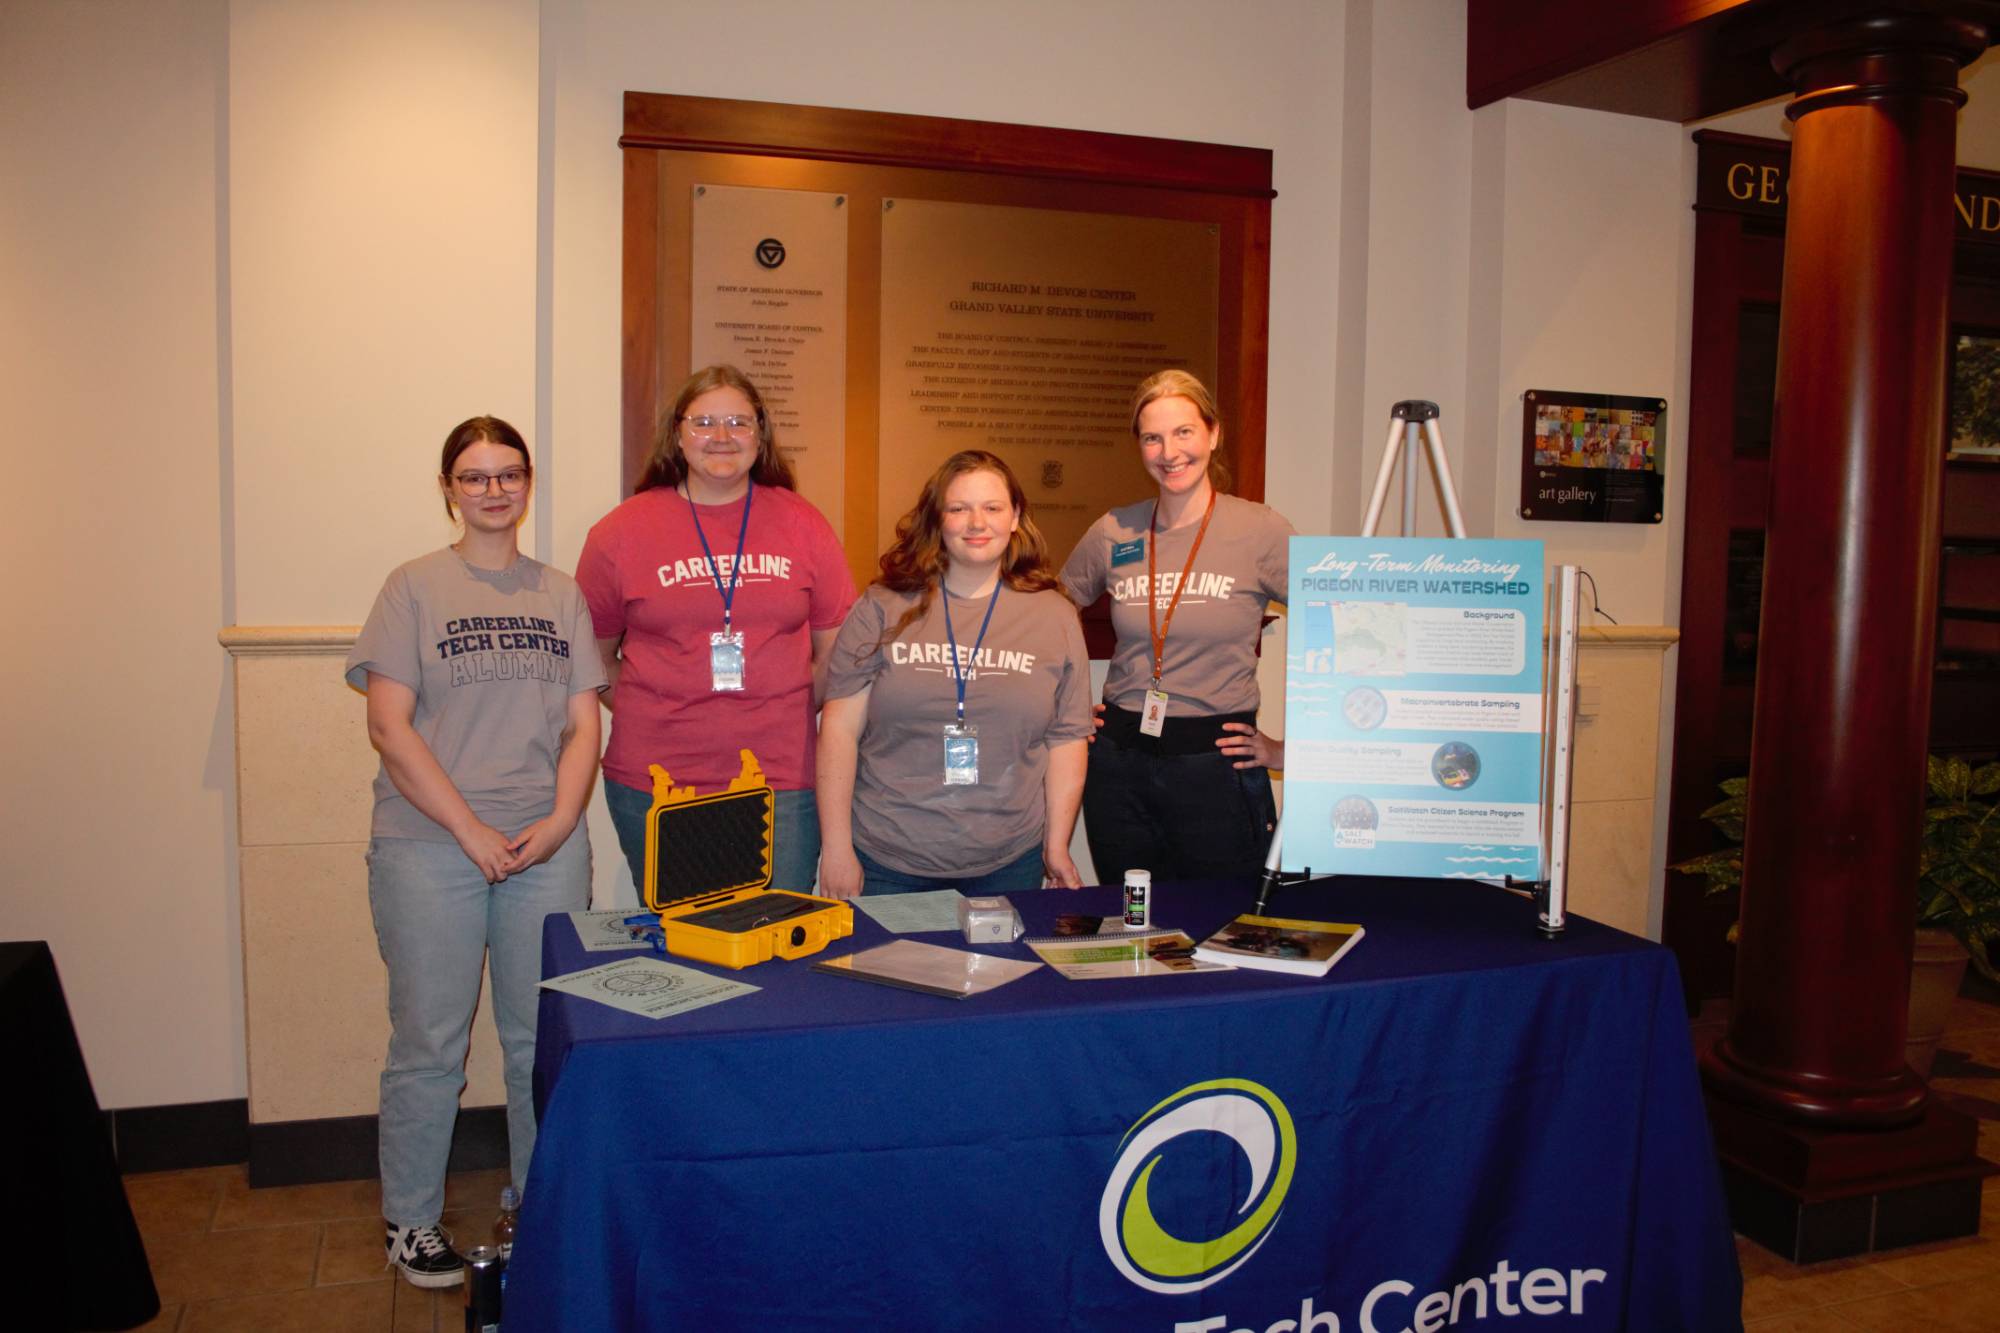 Careerline Tech Center teacher with her students at their display table indoors